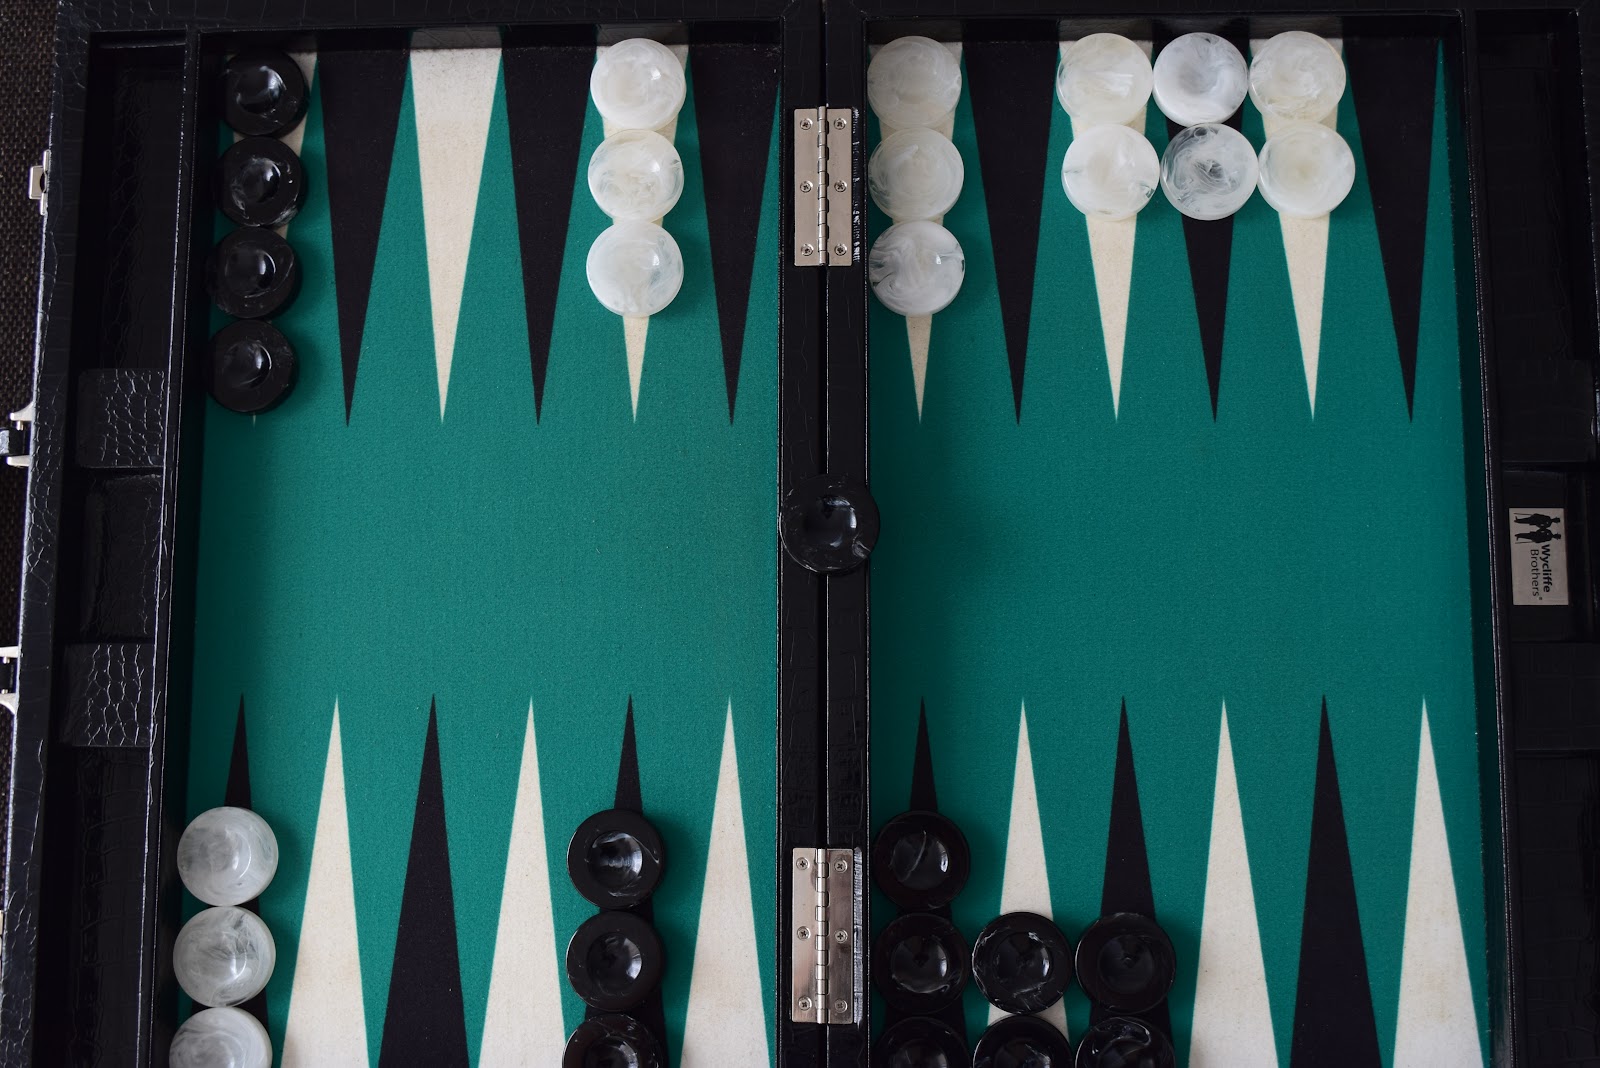 Backgammon board setup with a checker on the bar